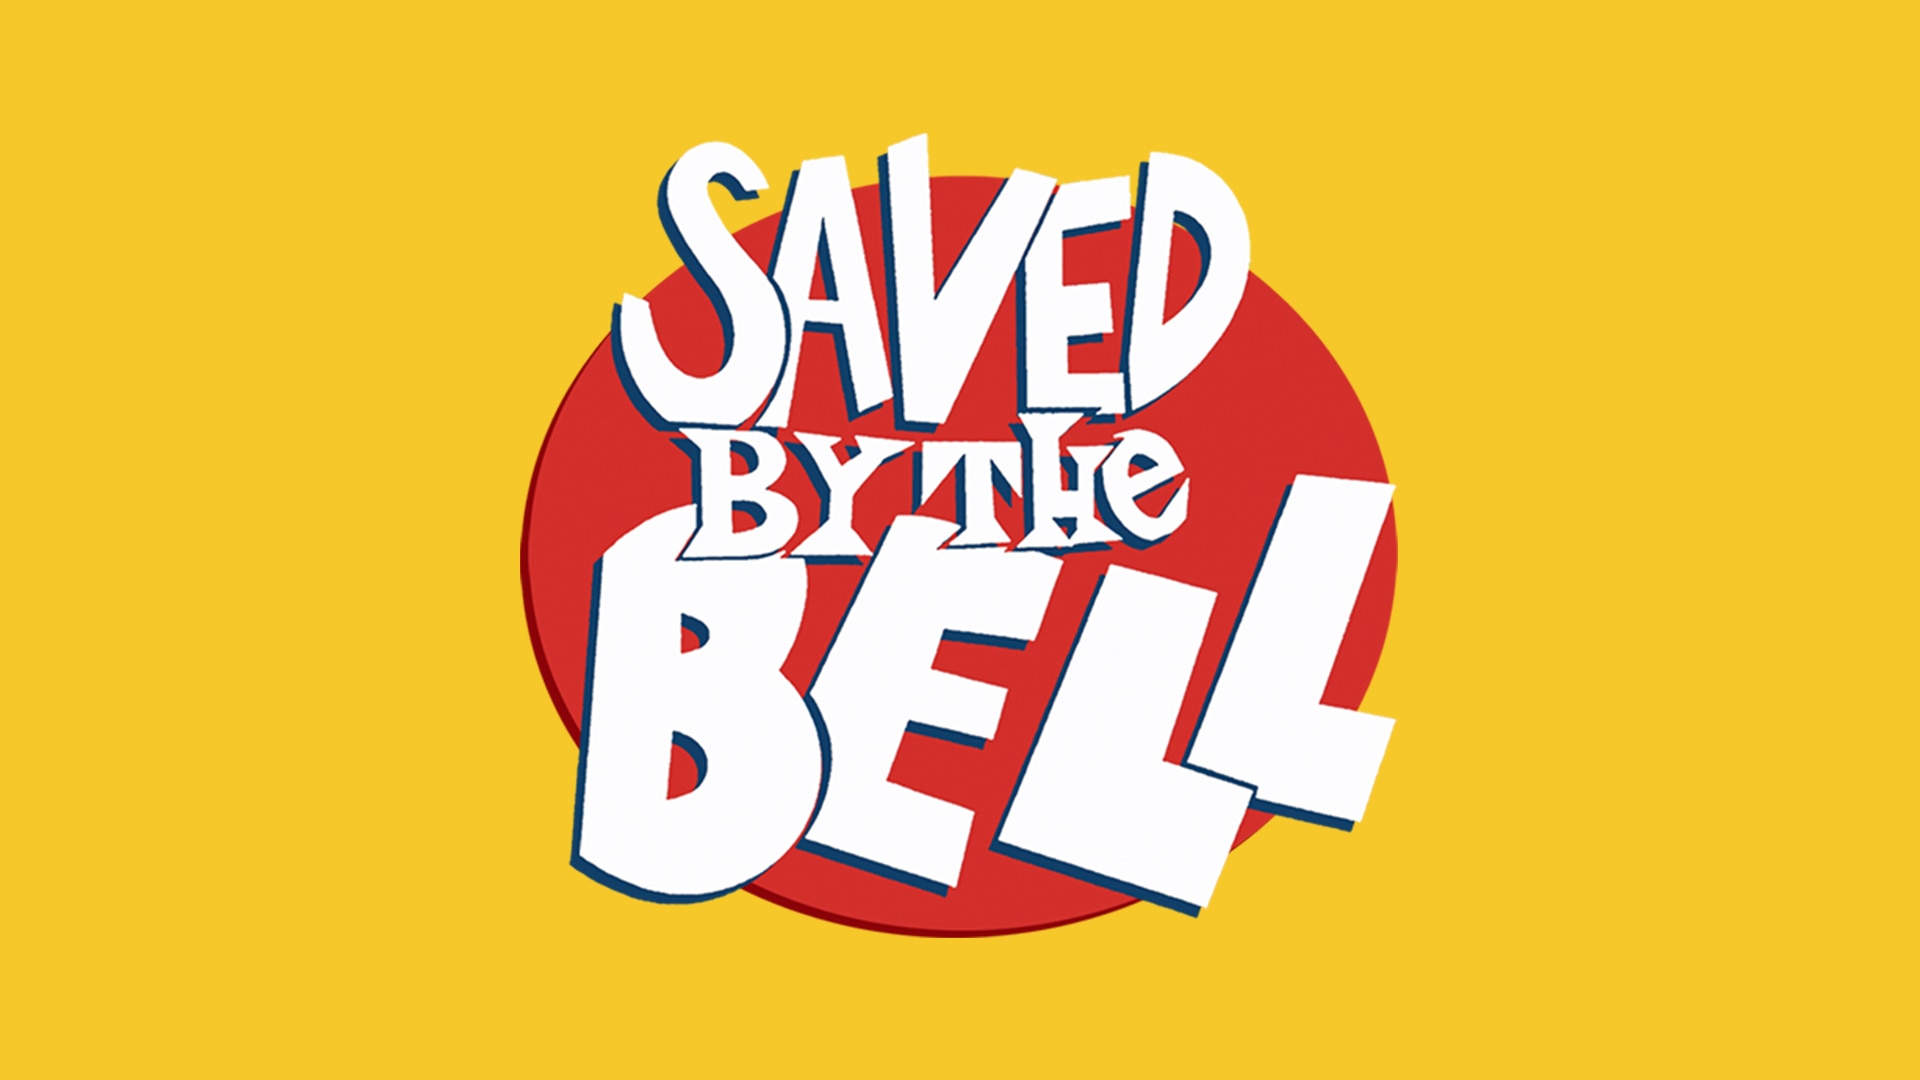 Saved by the Bell - NBC.com